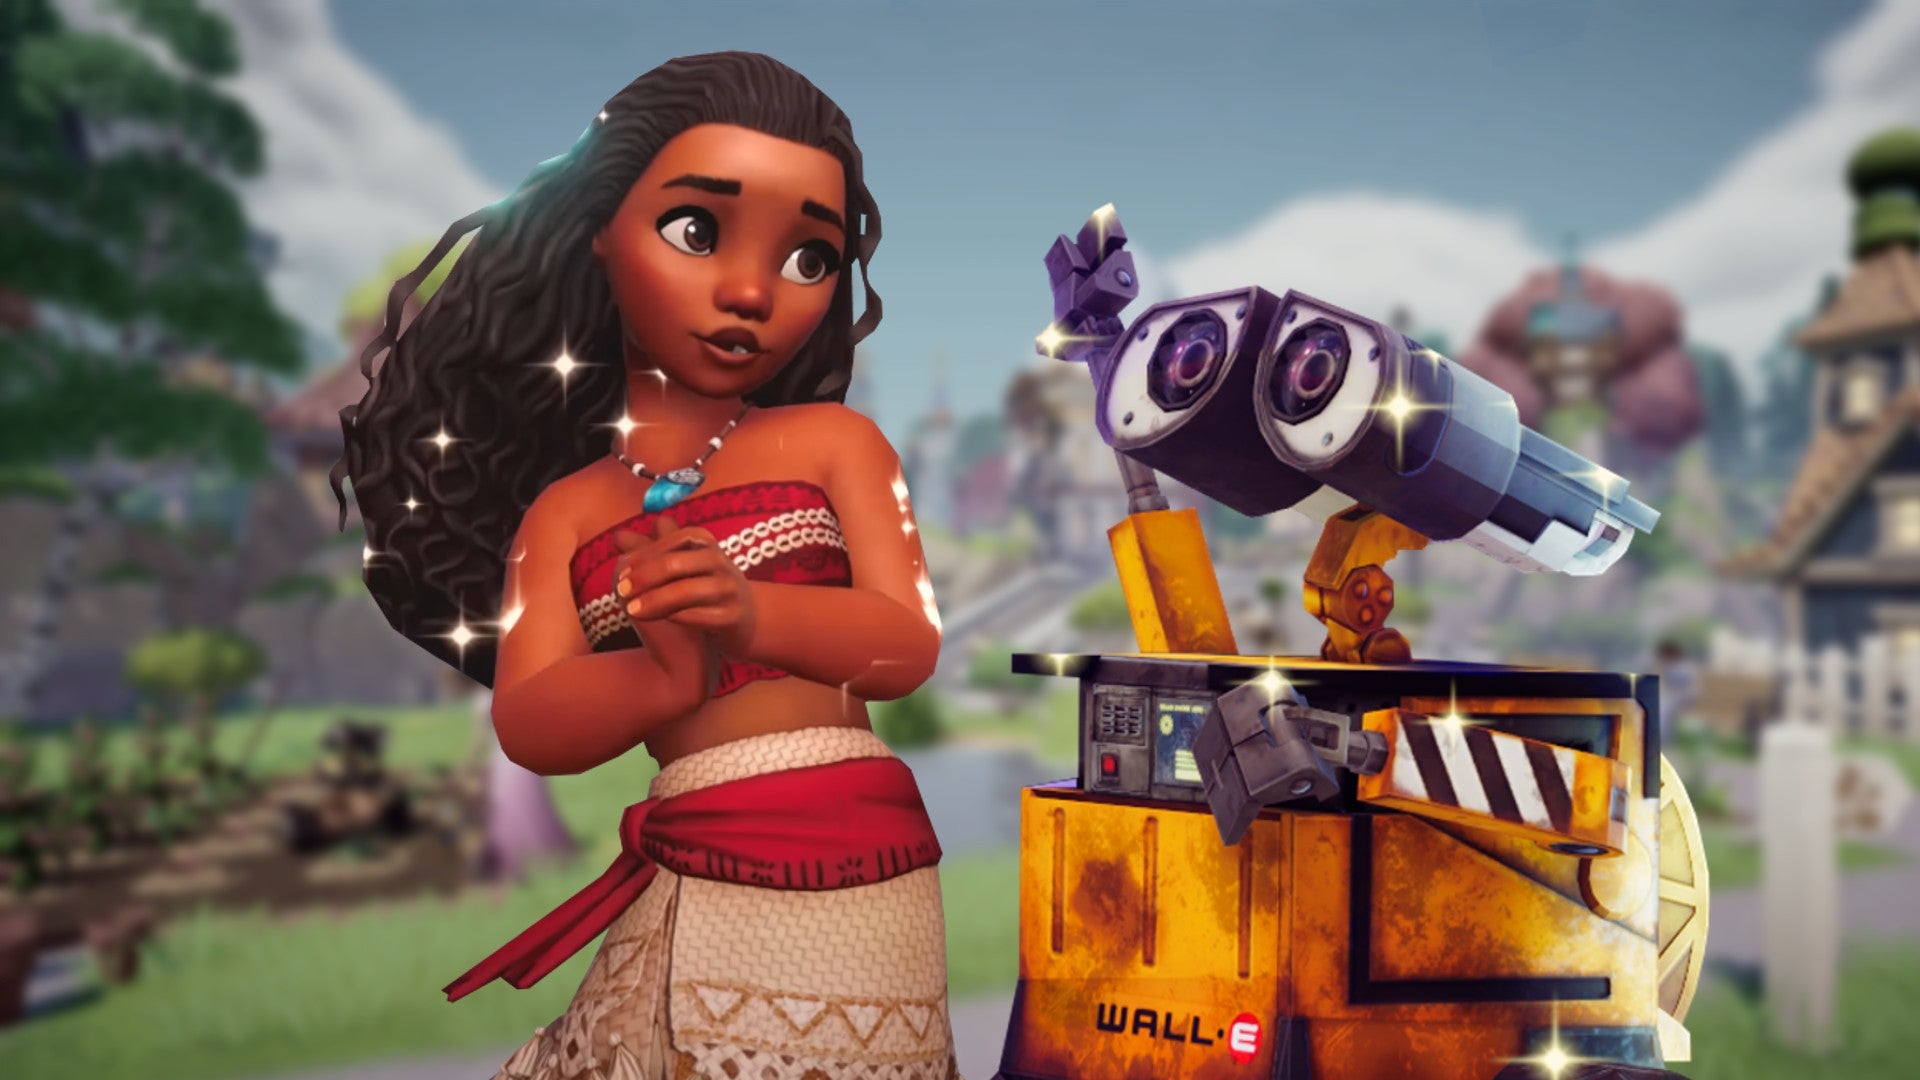 Disney Dreamlight Valley image showing Moana and Wall-E staring at each other in front of a blurred background of the Dreamlight Valley.